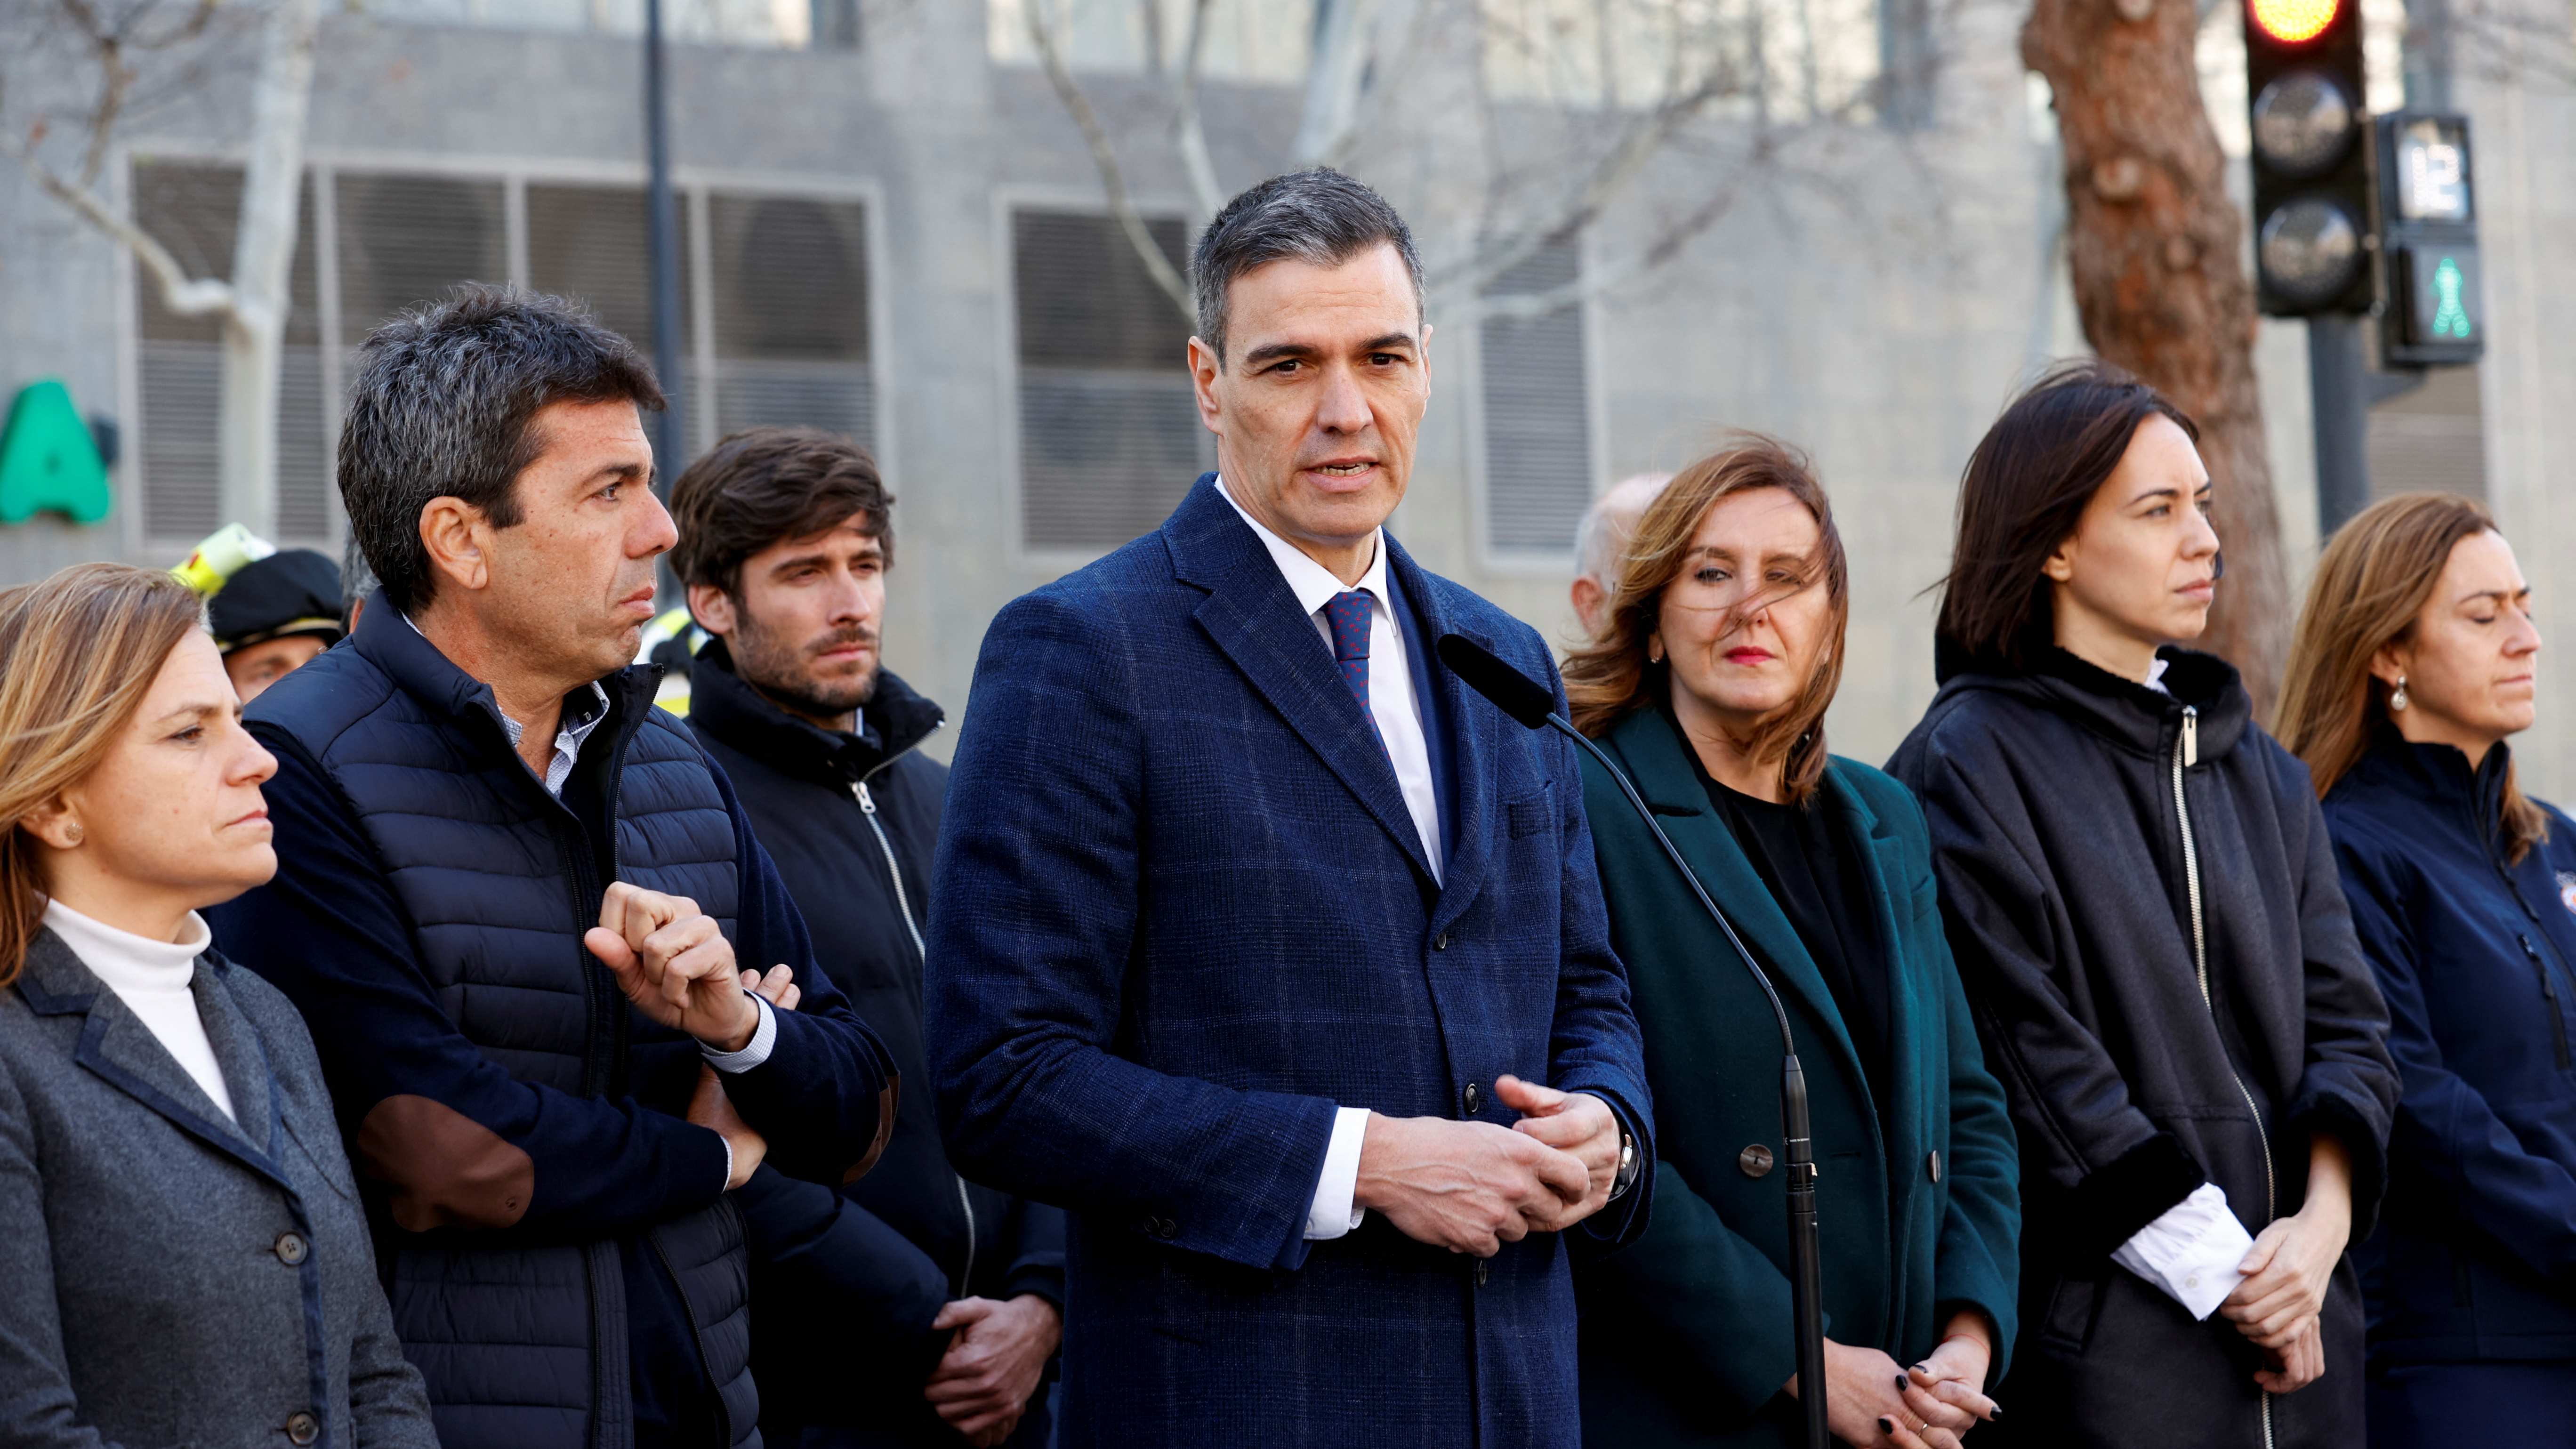 Spain's Prime Minister Pedro Sanchez speaks to the media as he visits Valencia in the aftermath of the fire. /Eva Manez/Reuters